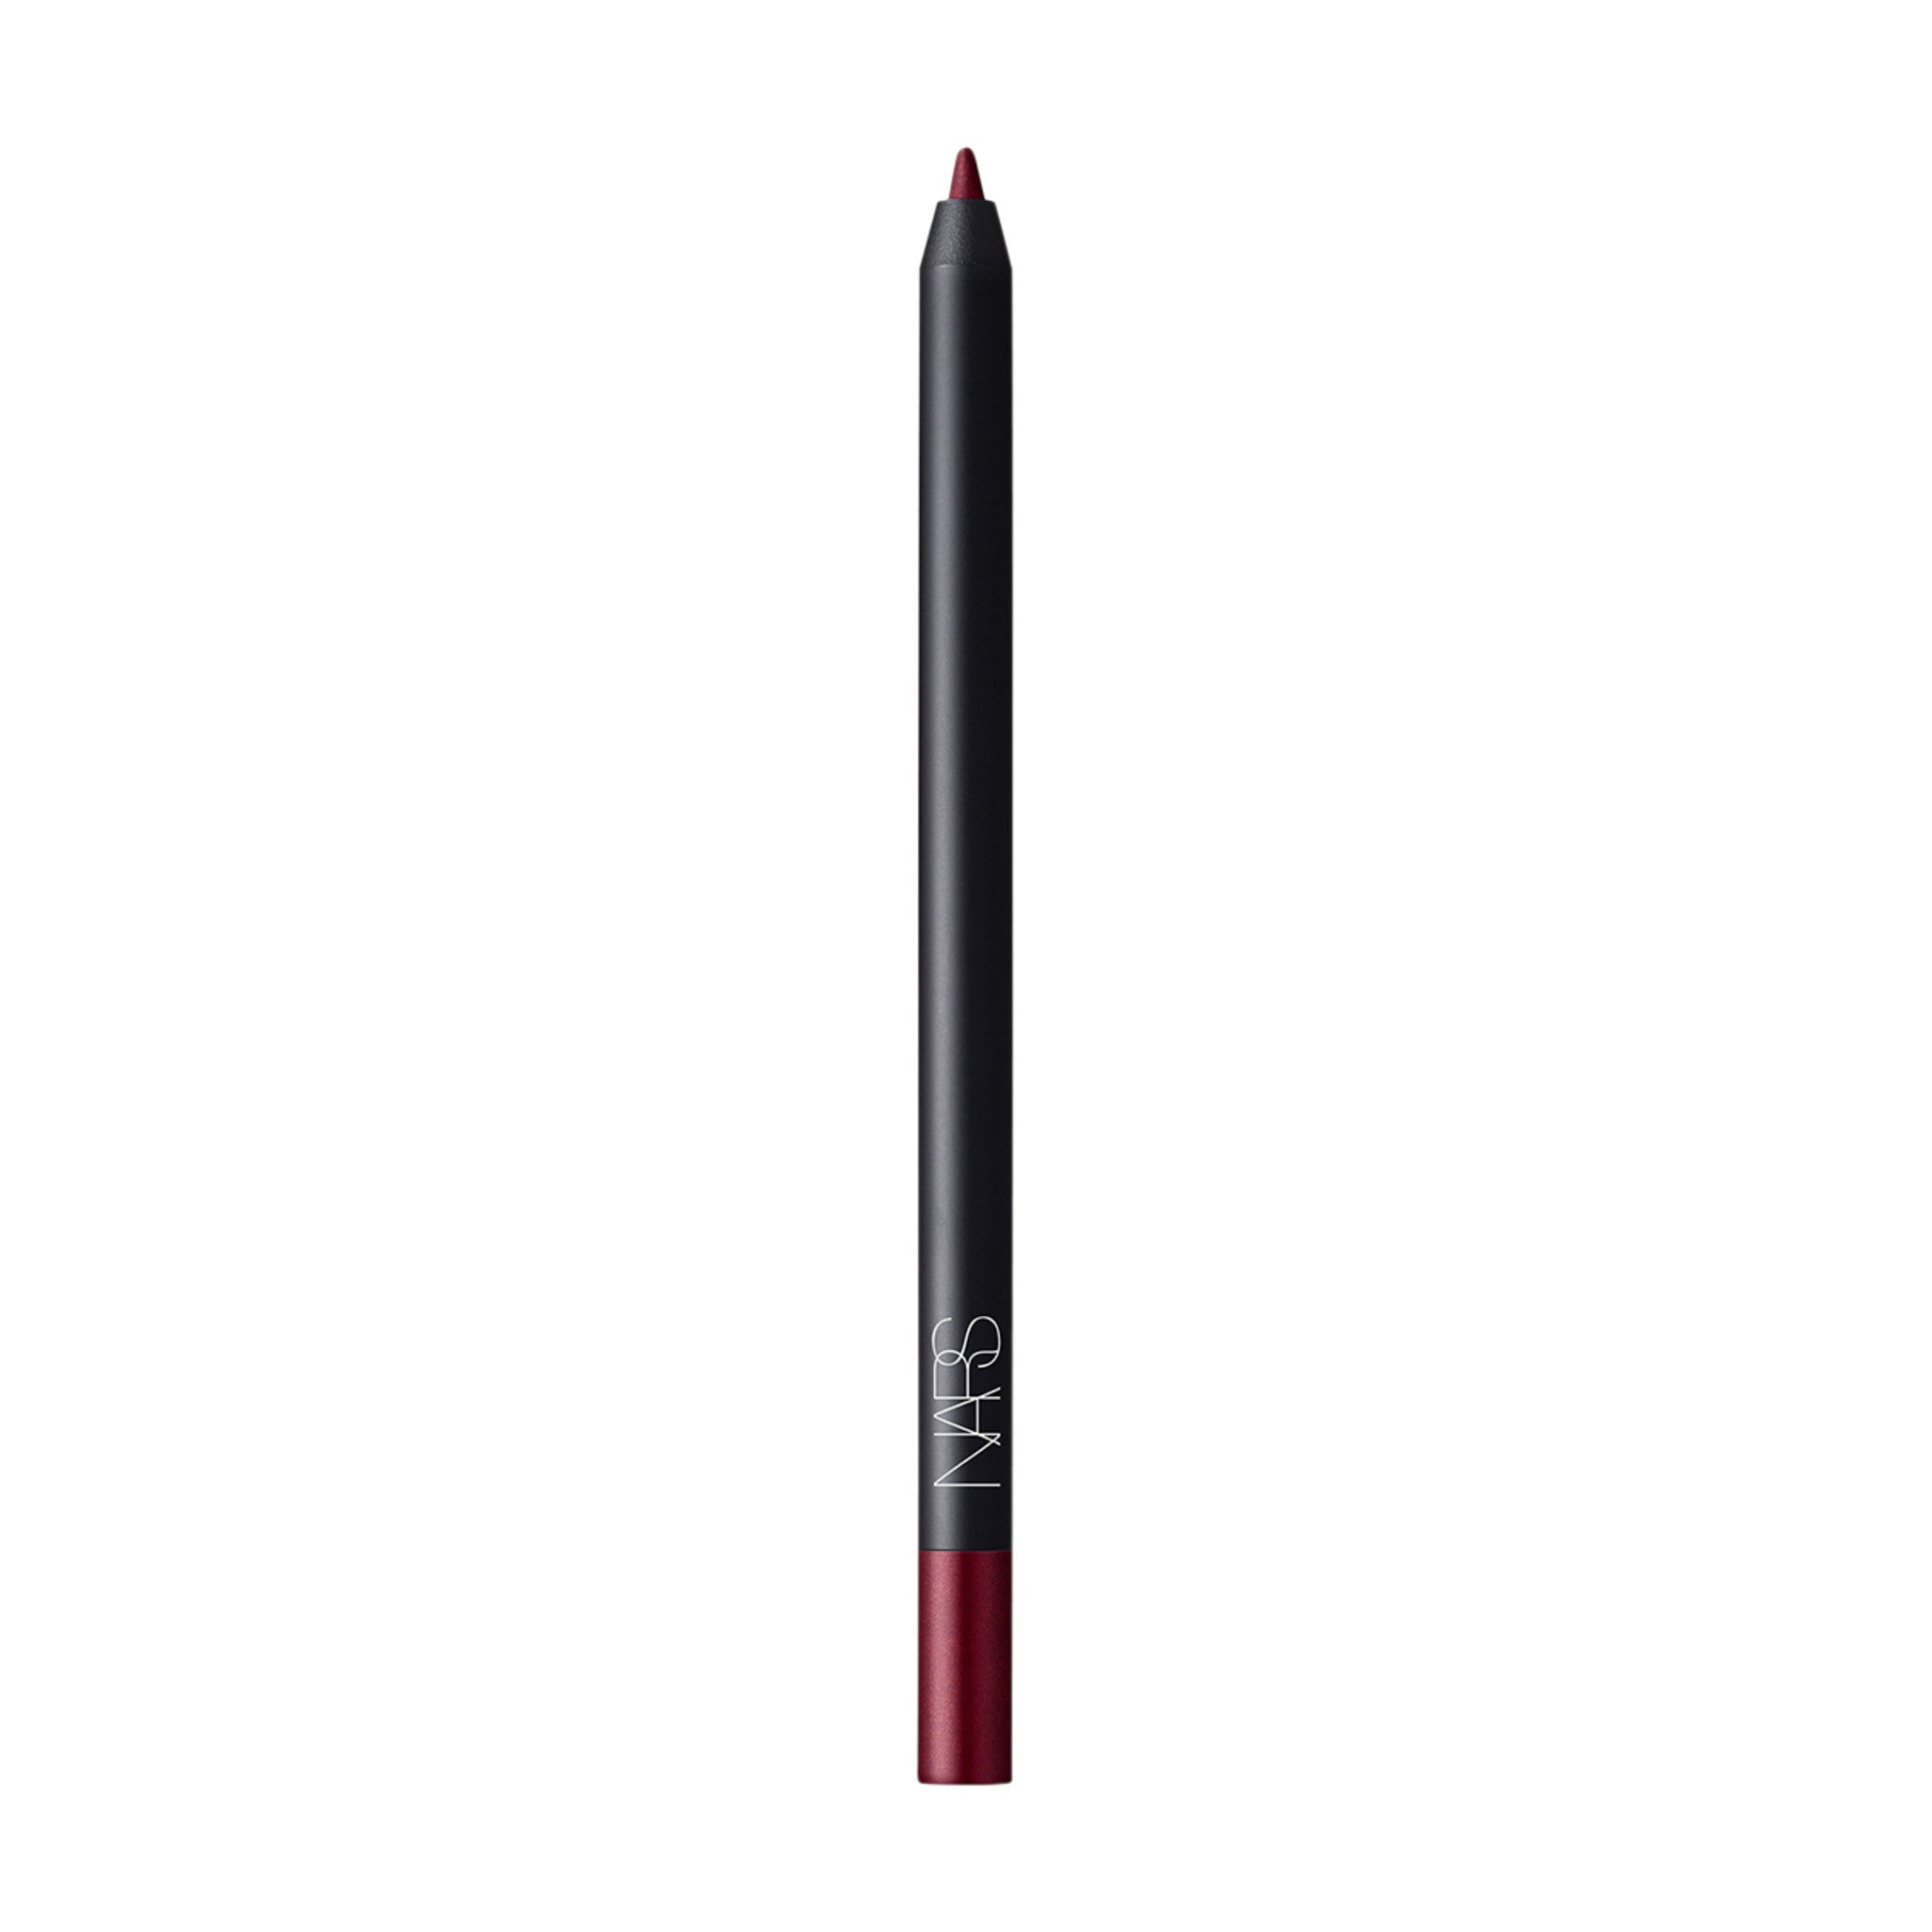 Nars High-Pigment Longwear Eyeliner Color/Shade variant: Broadway main image. This product is in the color pink